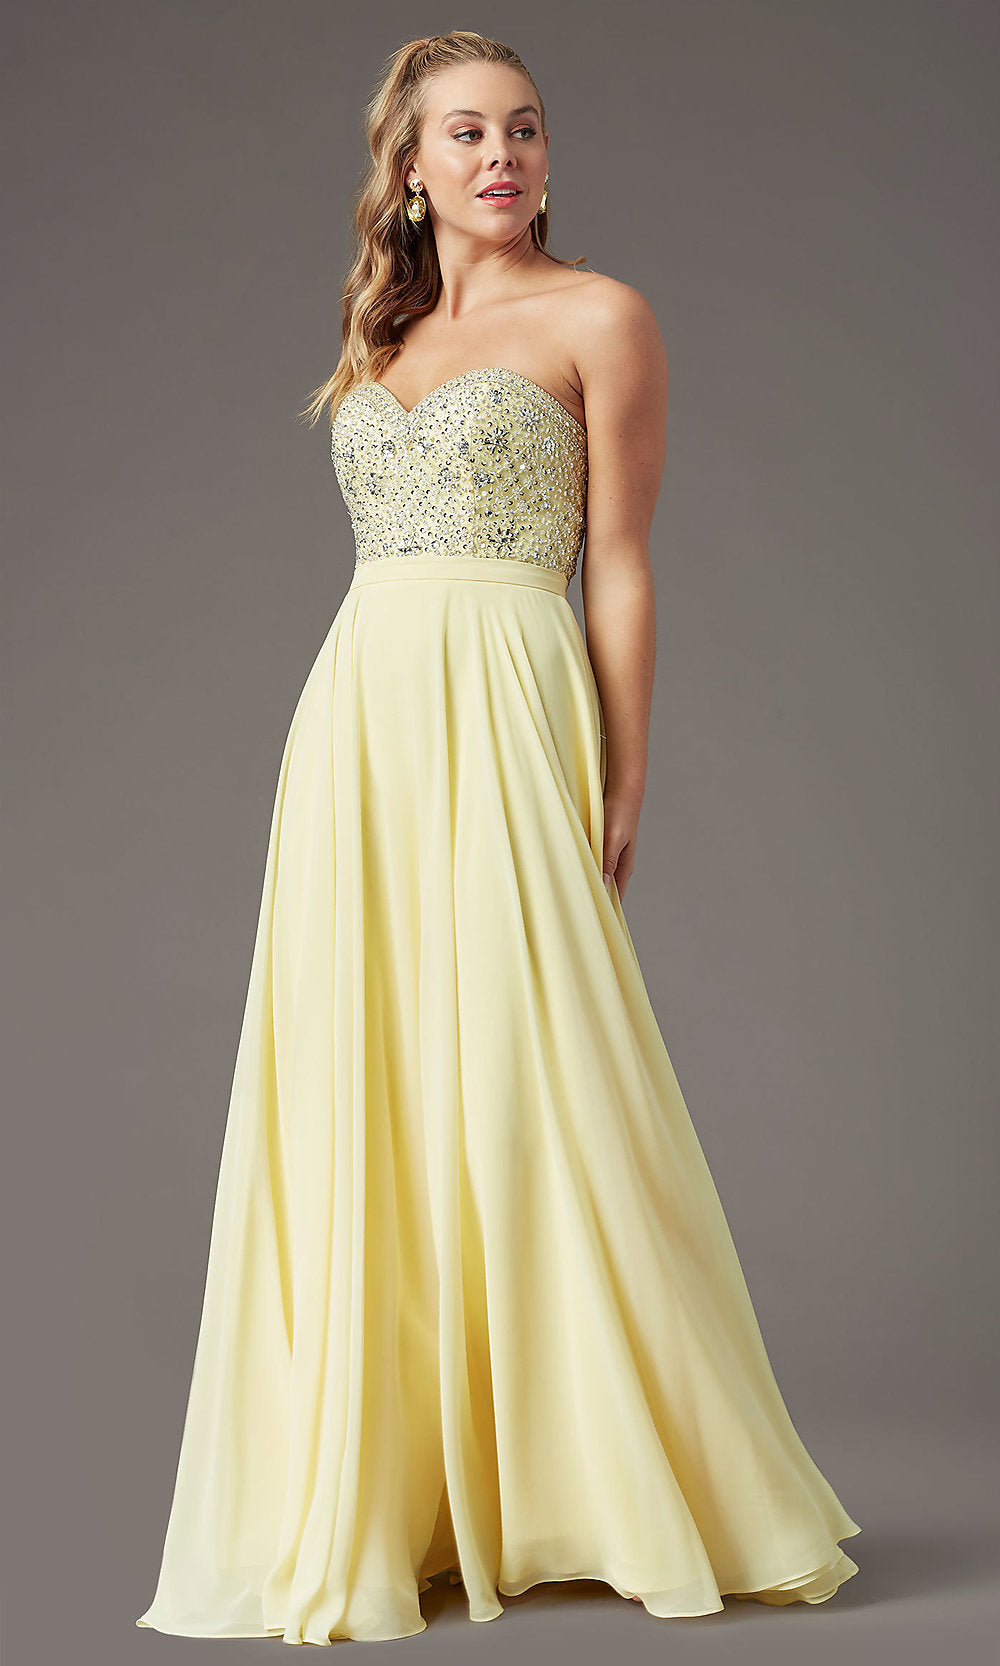 Daffodil Strapless Long Formal Prom Dress by PromGirl